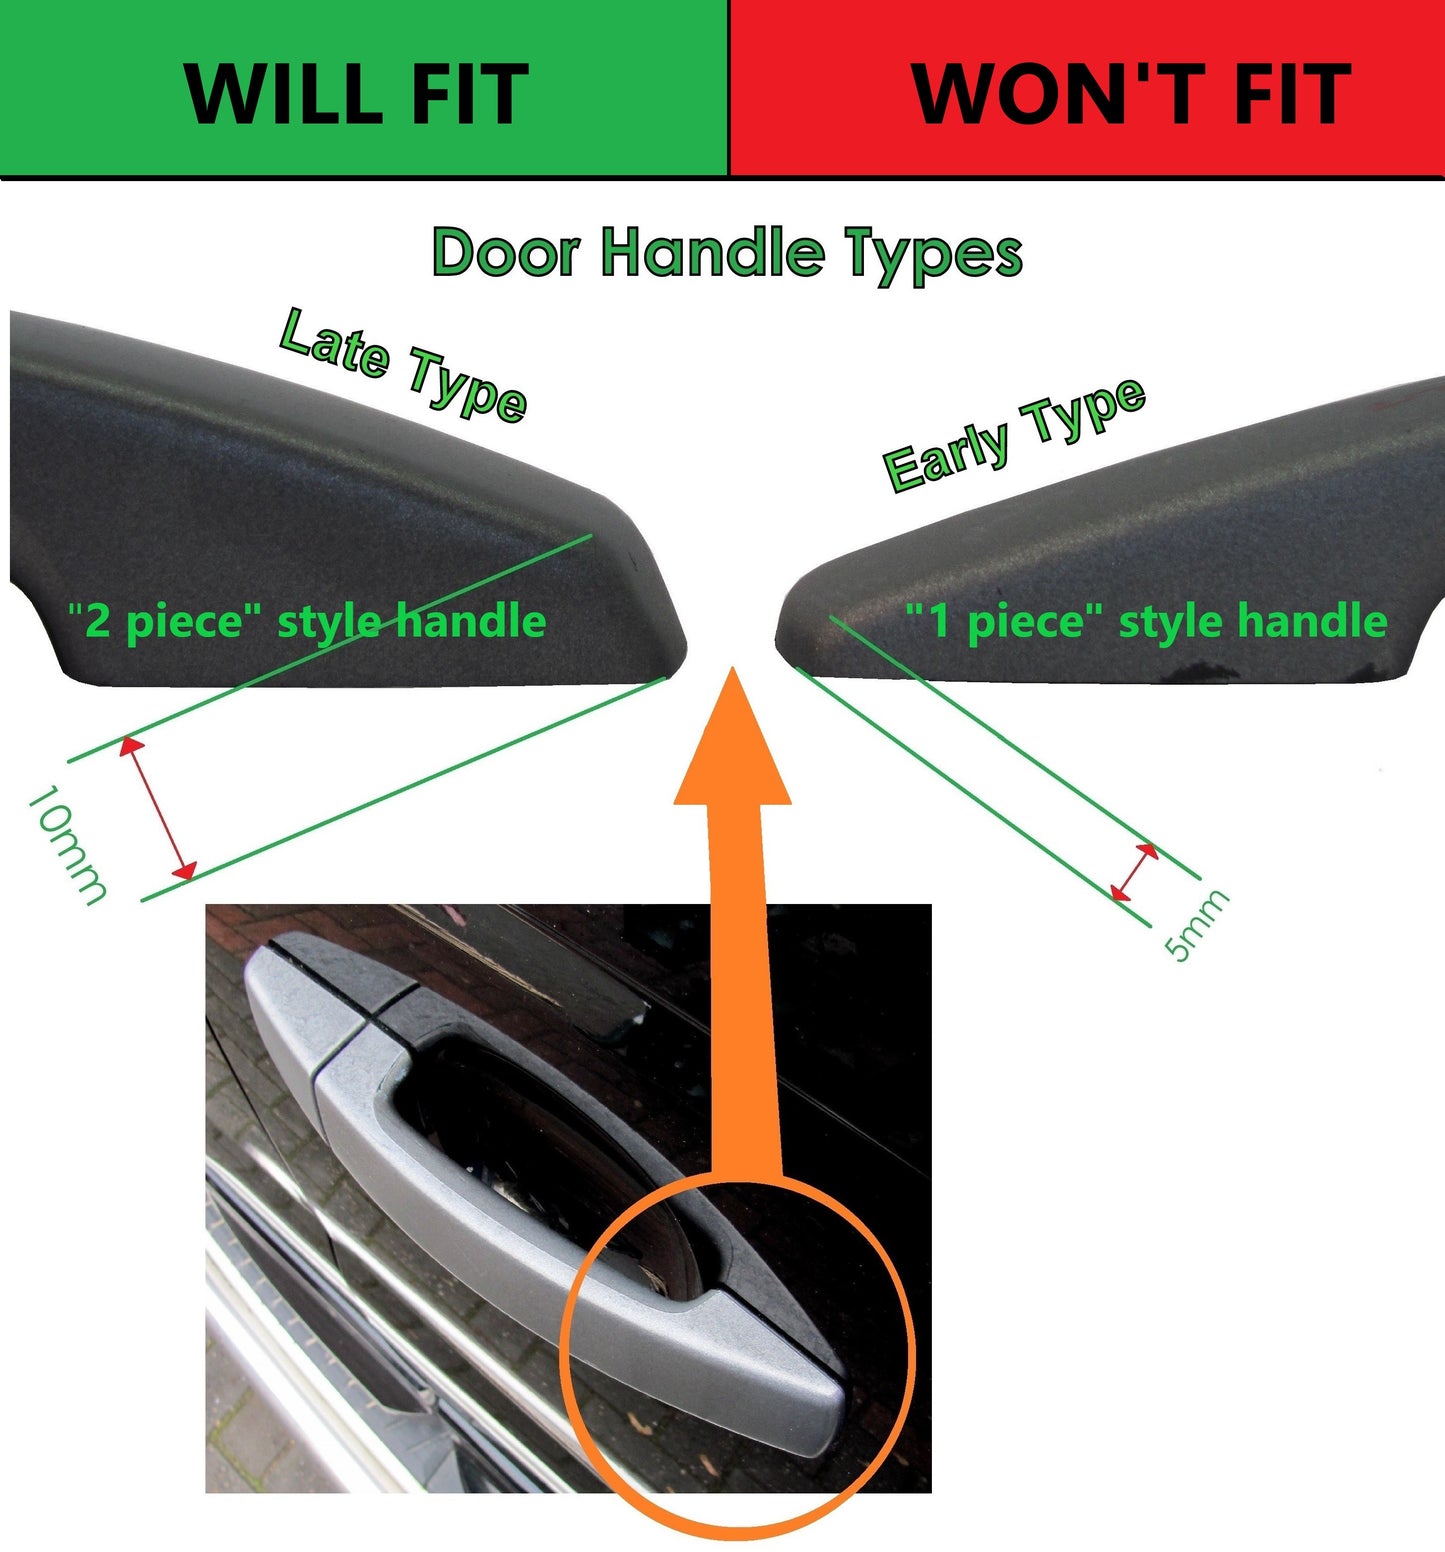 Door Handle "Skins" for Land Rover Discovery 3 fitted with 2 pc Handle - Fuji White